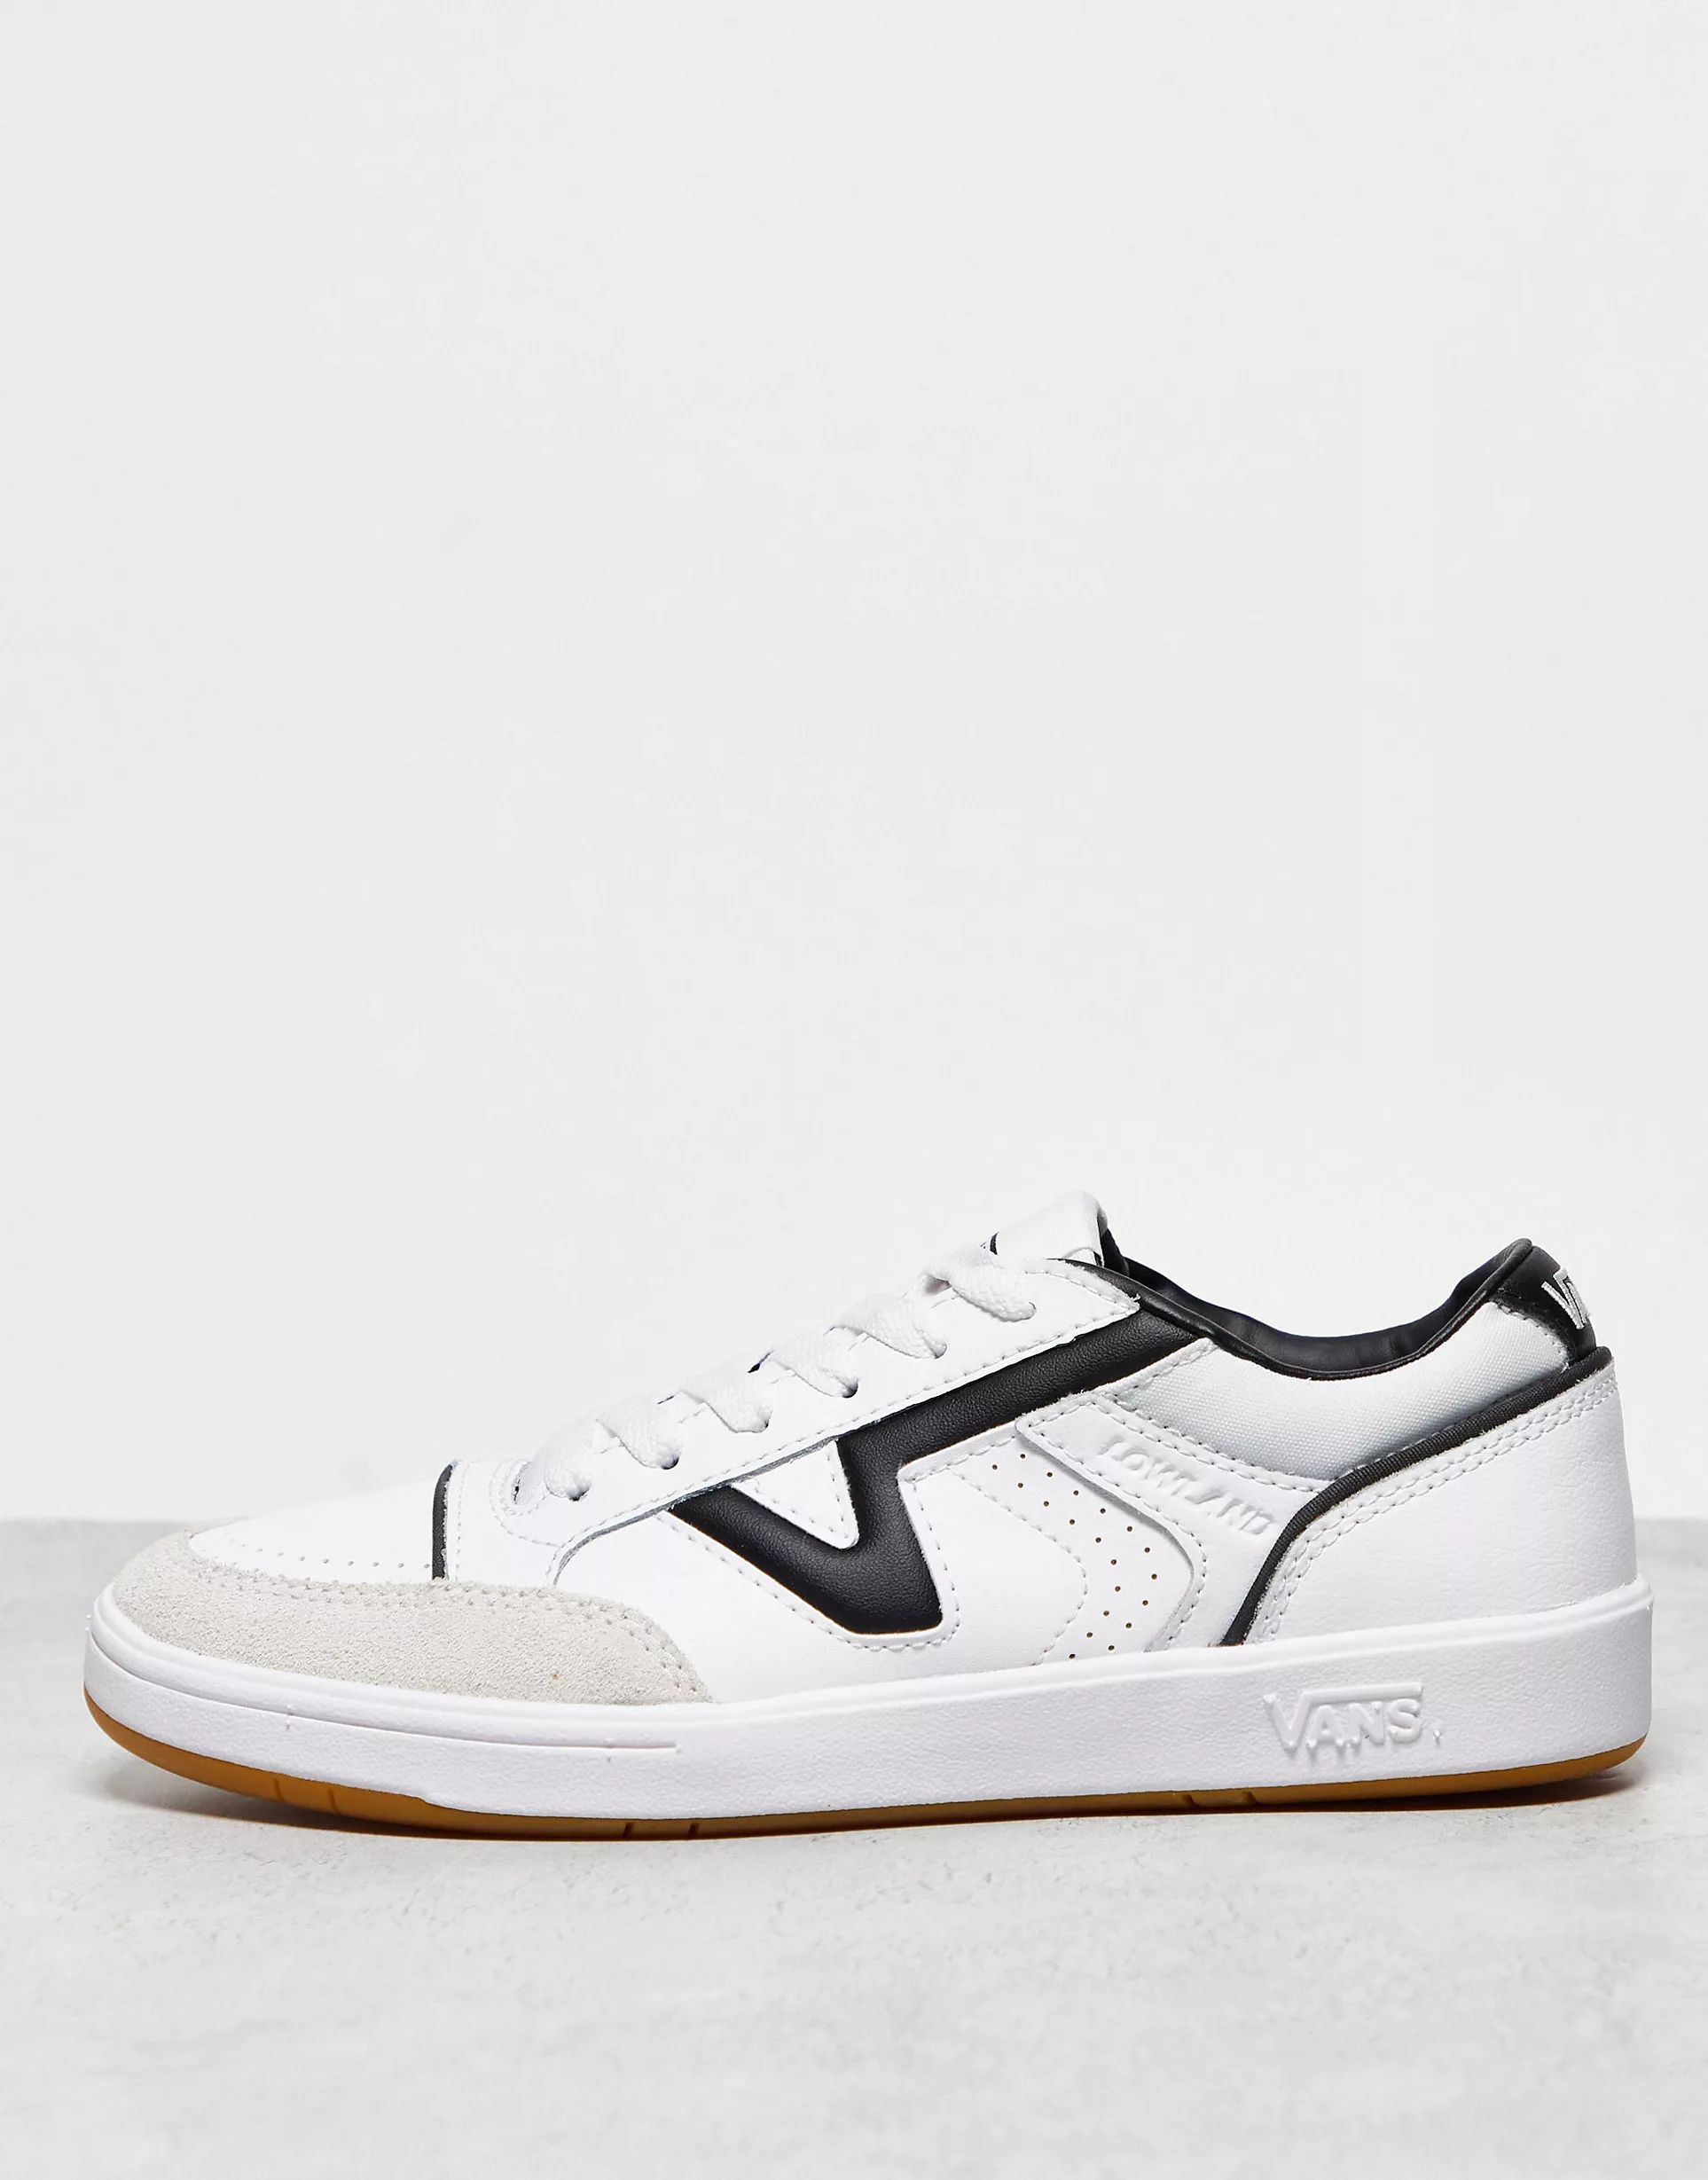 Vans Lowland JMP R sneakers in court true white and black with gum sole | ASOS | ASOS (Global)